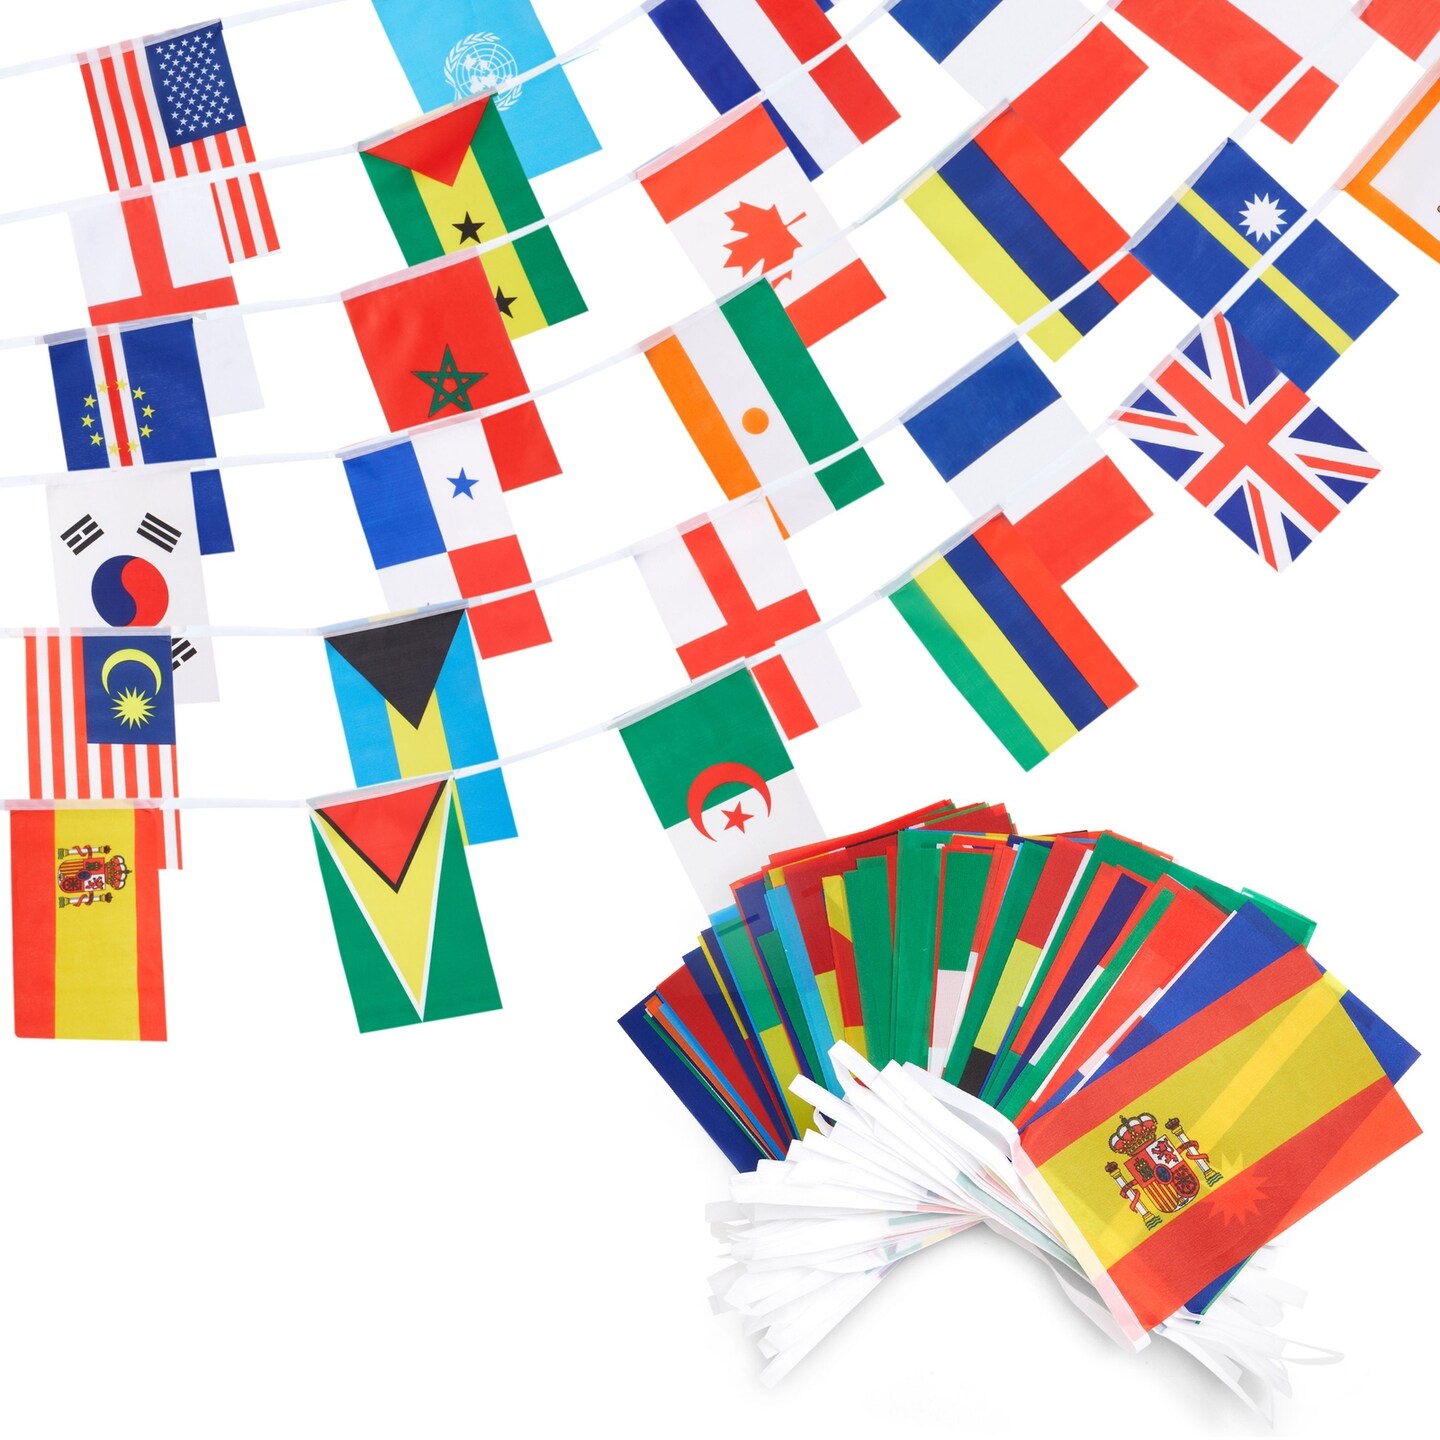 Small International Flags of the World Banner with 100 Different Assorted Countries, Hanging Multicultural Decorations for Party, Classroom, Events (5.2 x 9.2 in, 80 ft Total)